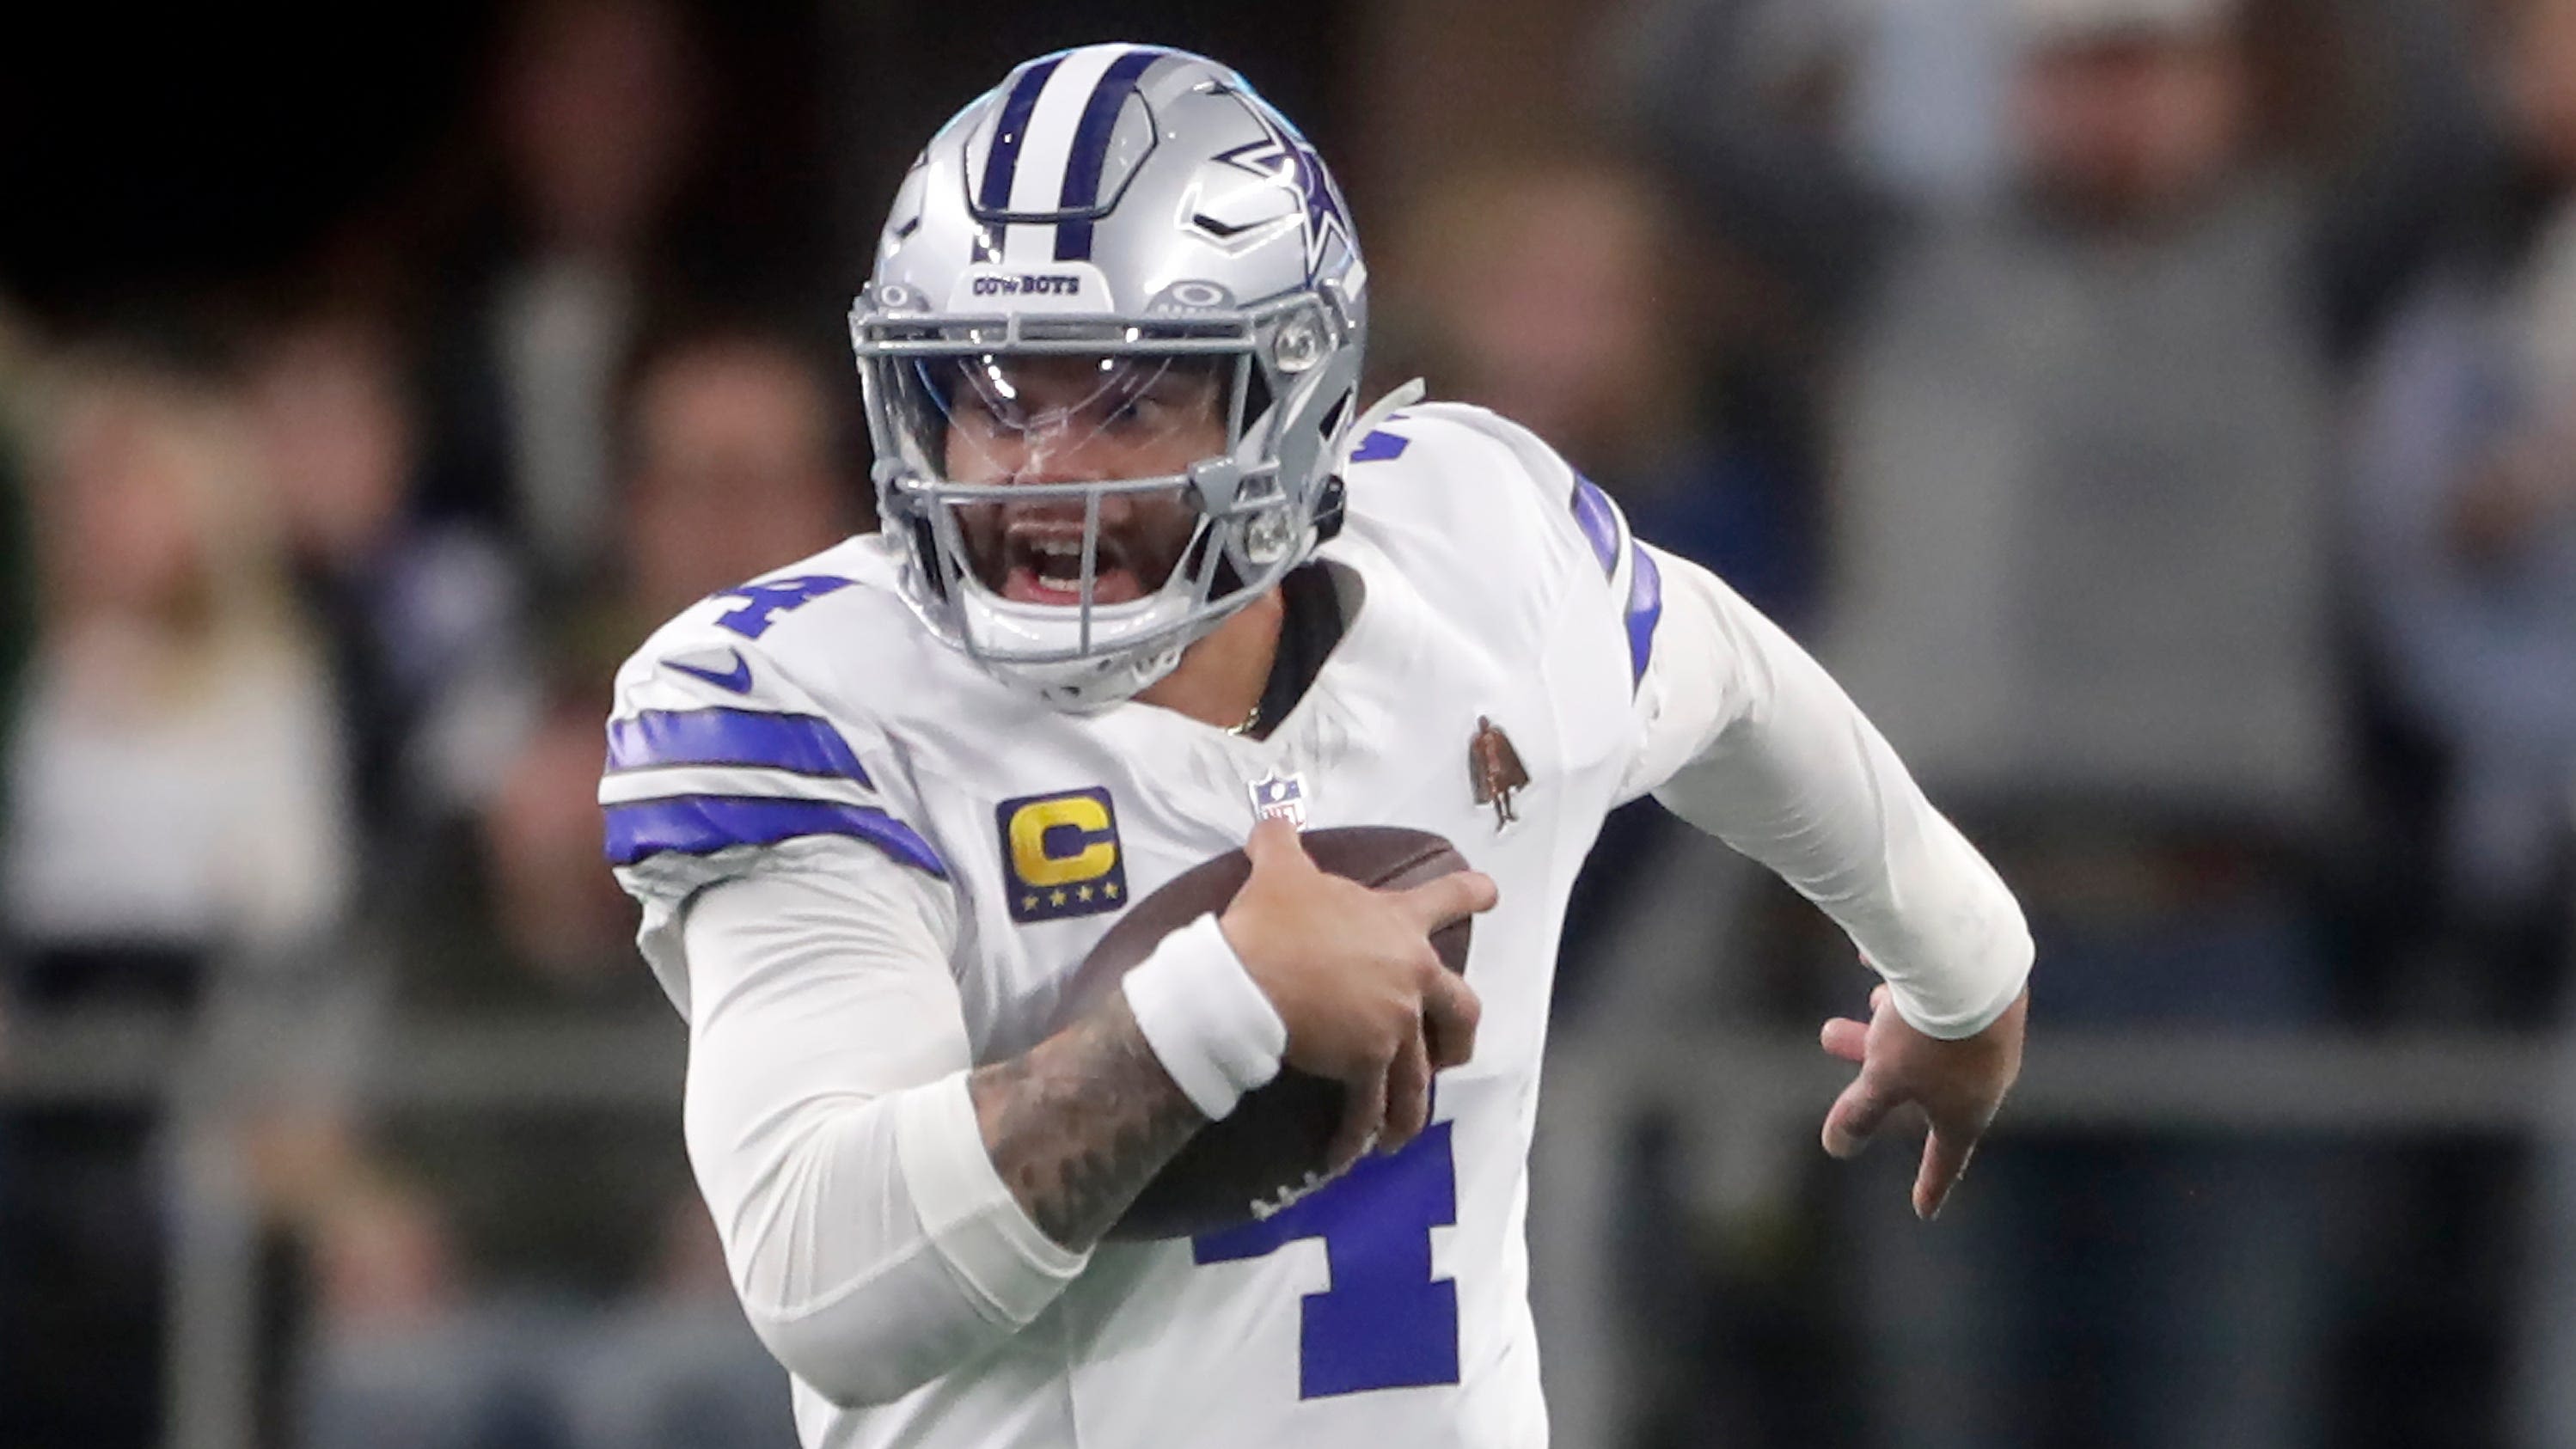 Cowboys QB Dak Prescott won't face charges for alleged sexual assault in 2017